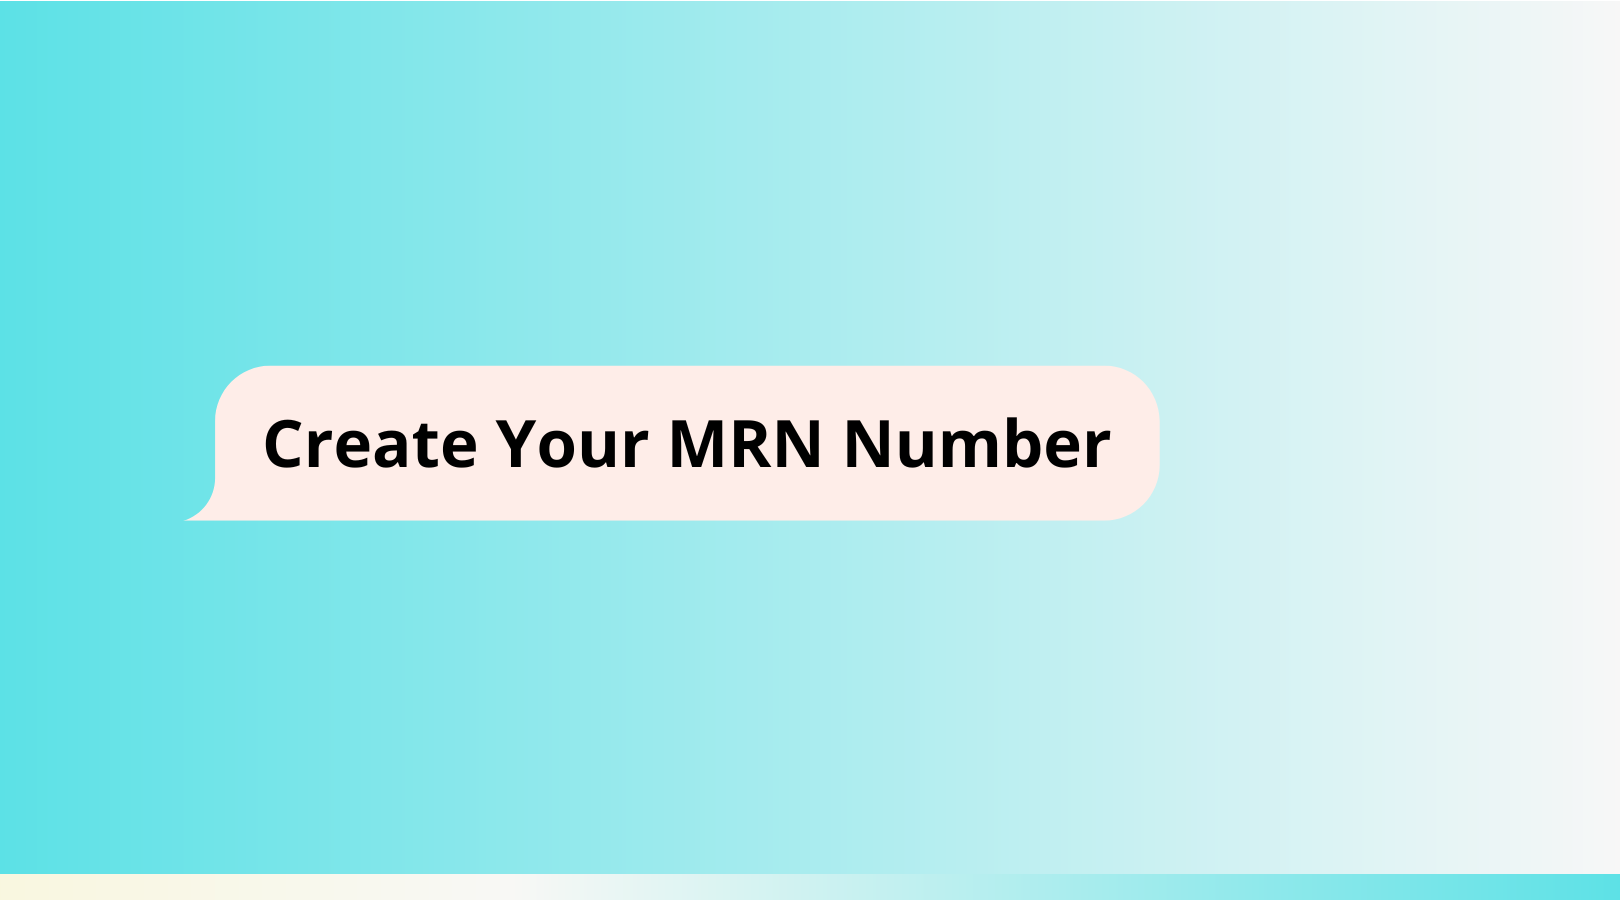 How to get MRN number in Dubai